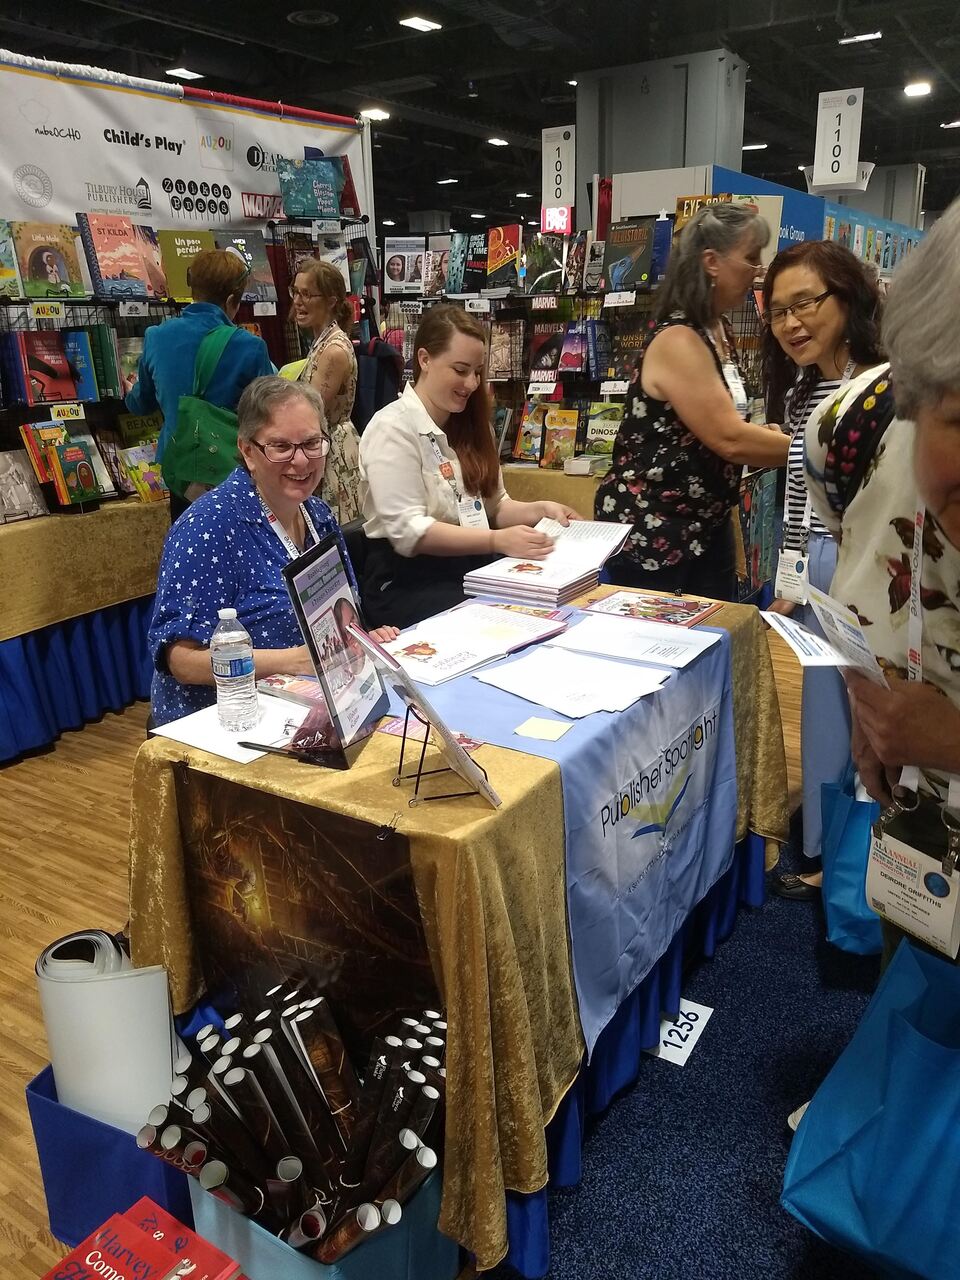 Signing copies of Esther's Gragger at the American Library Association Conference on June 22, 2019.